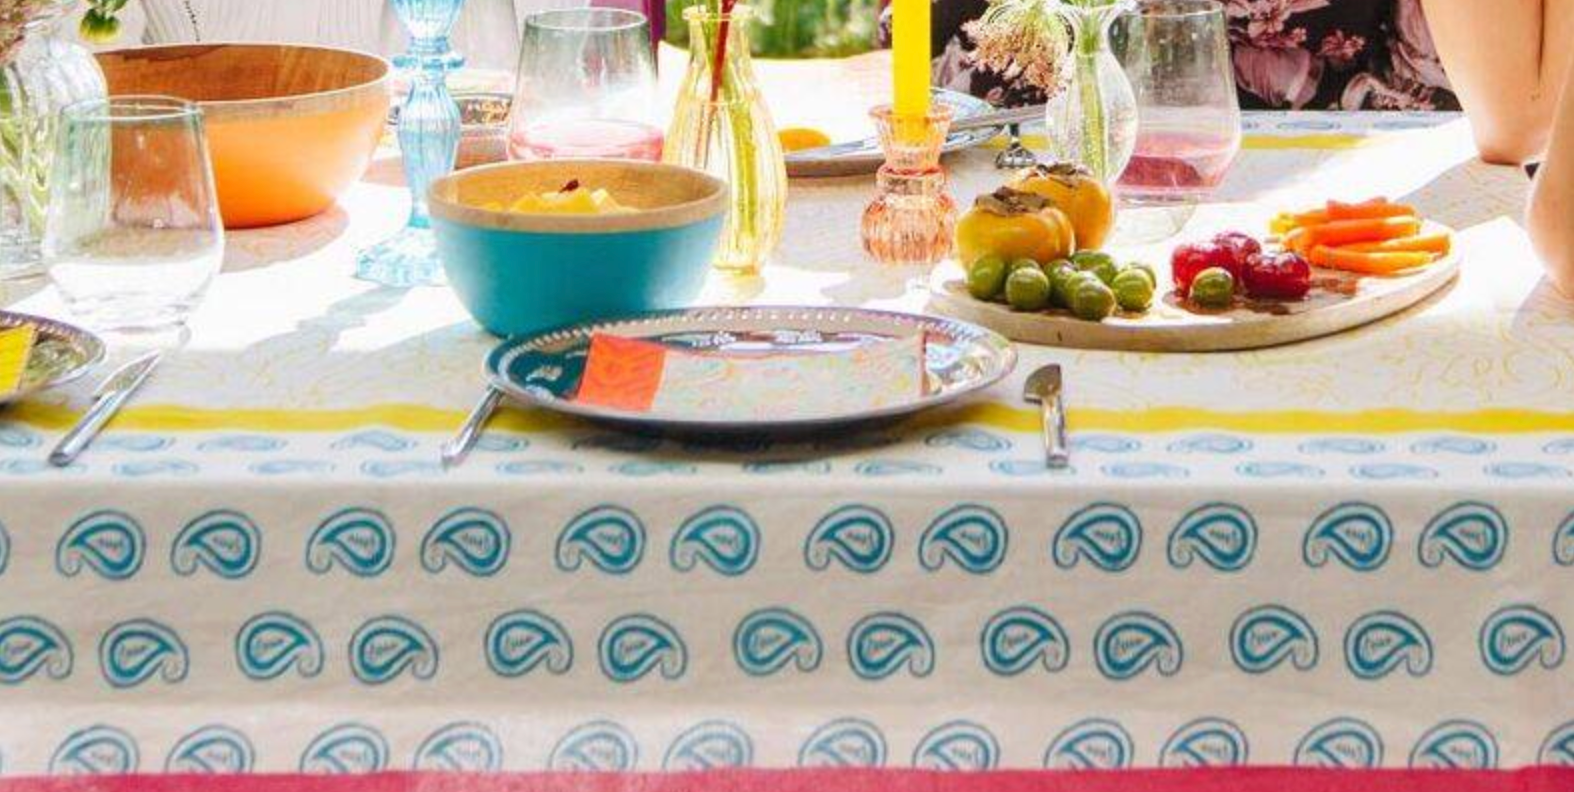 Summer Tablescapes